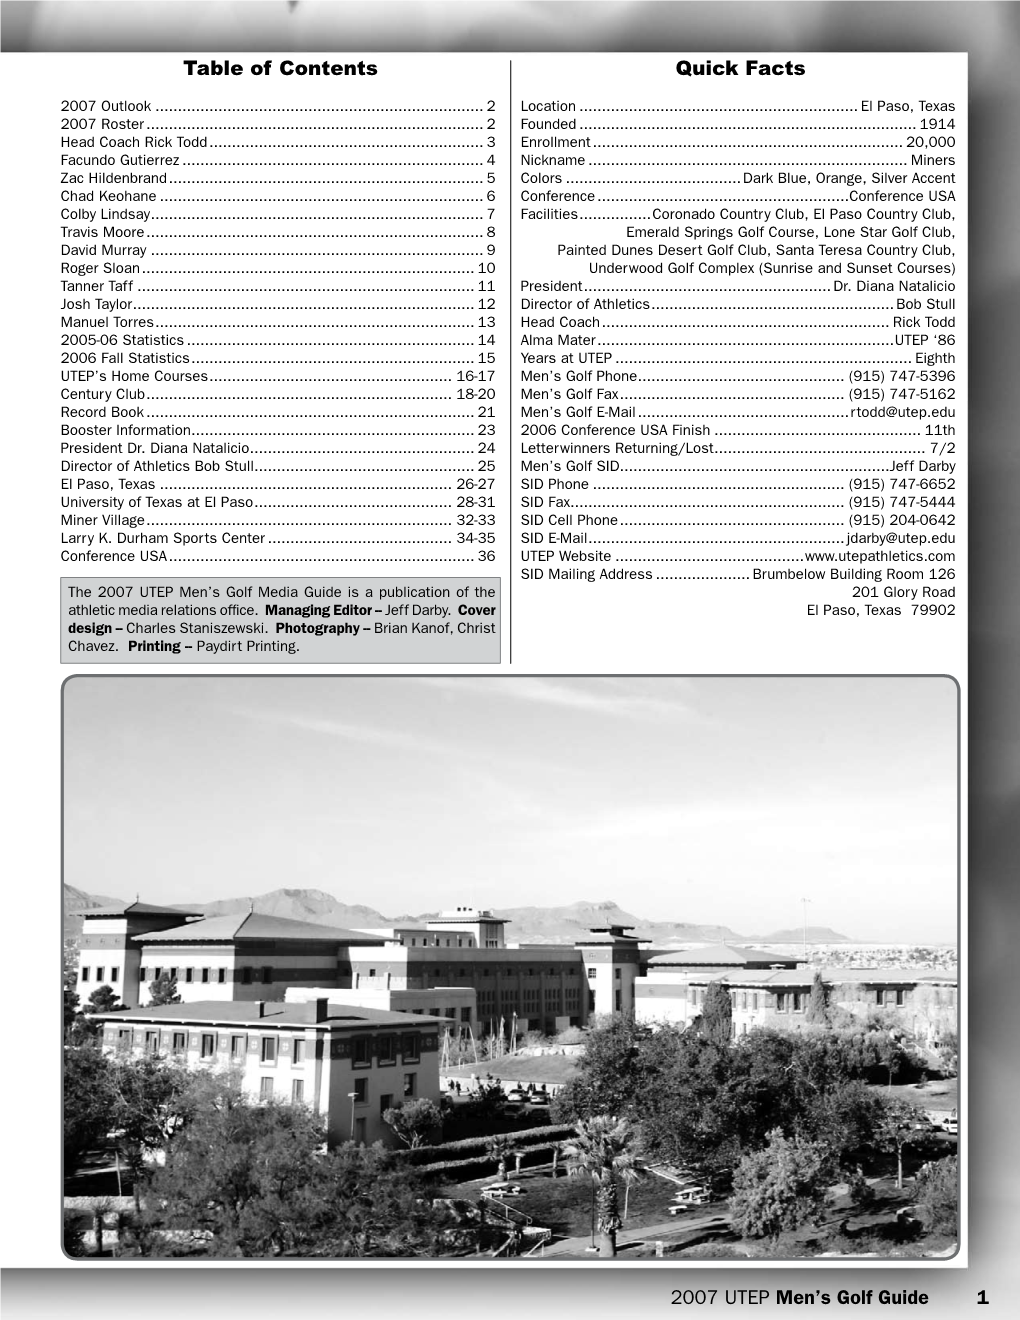 2007 UTEP Men's Golf Guide Quick Facts Table of Contents